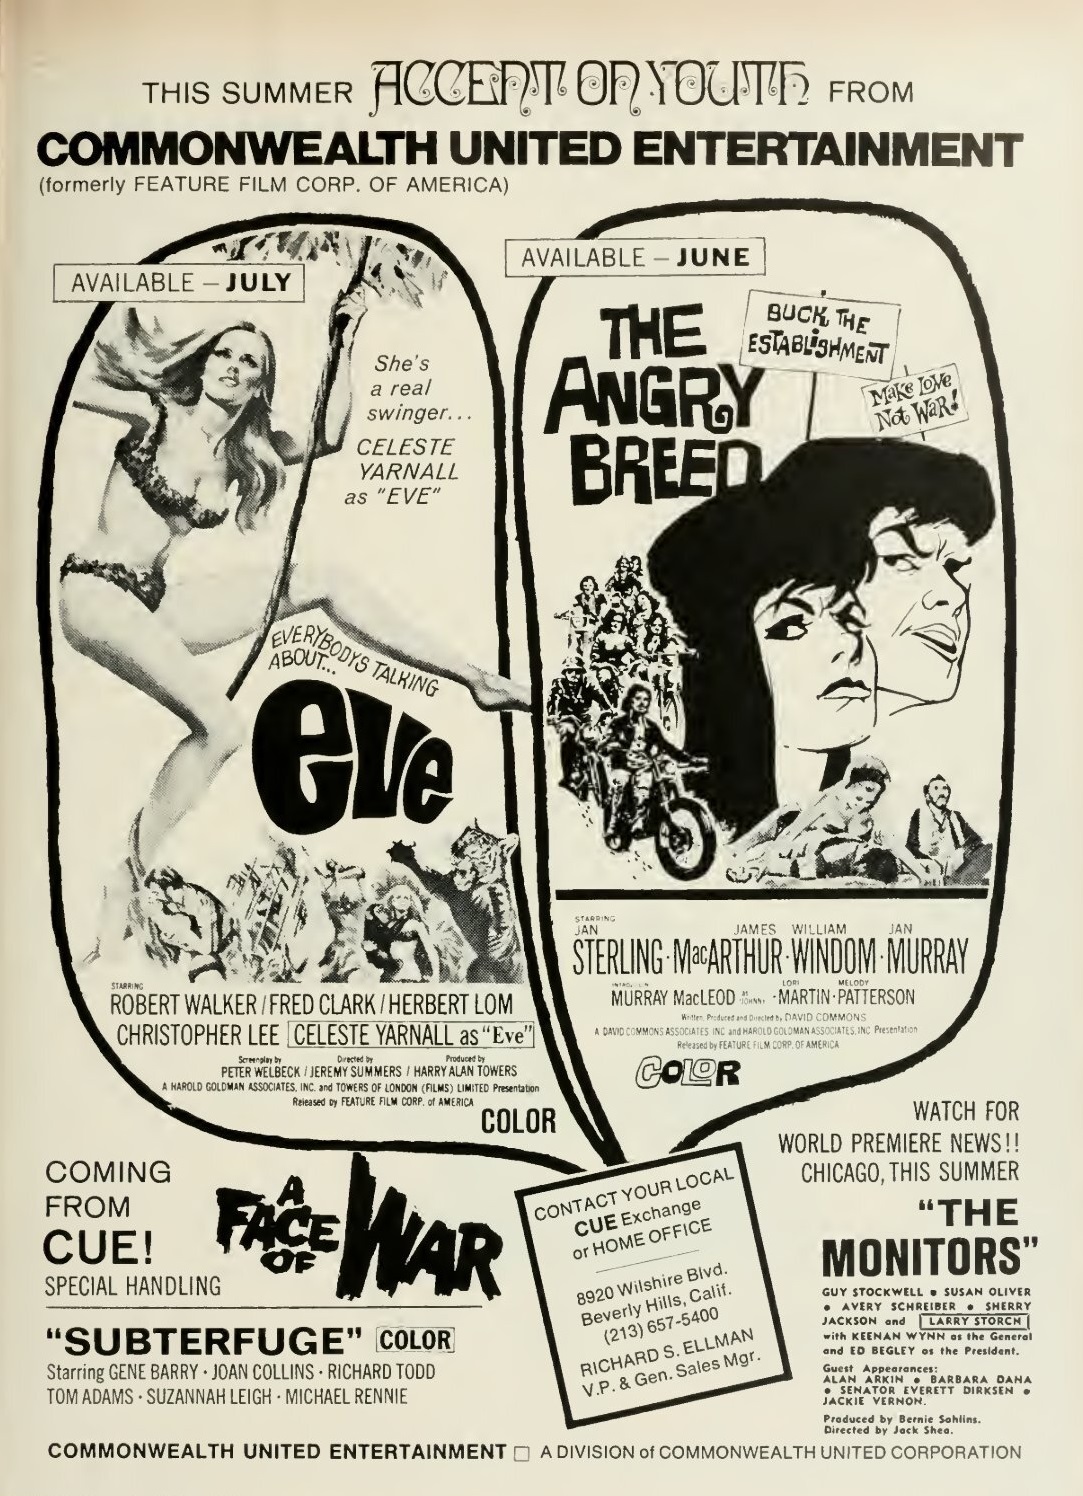 The Angry Breed (1968) Screenshot 2 